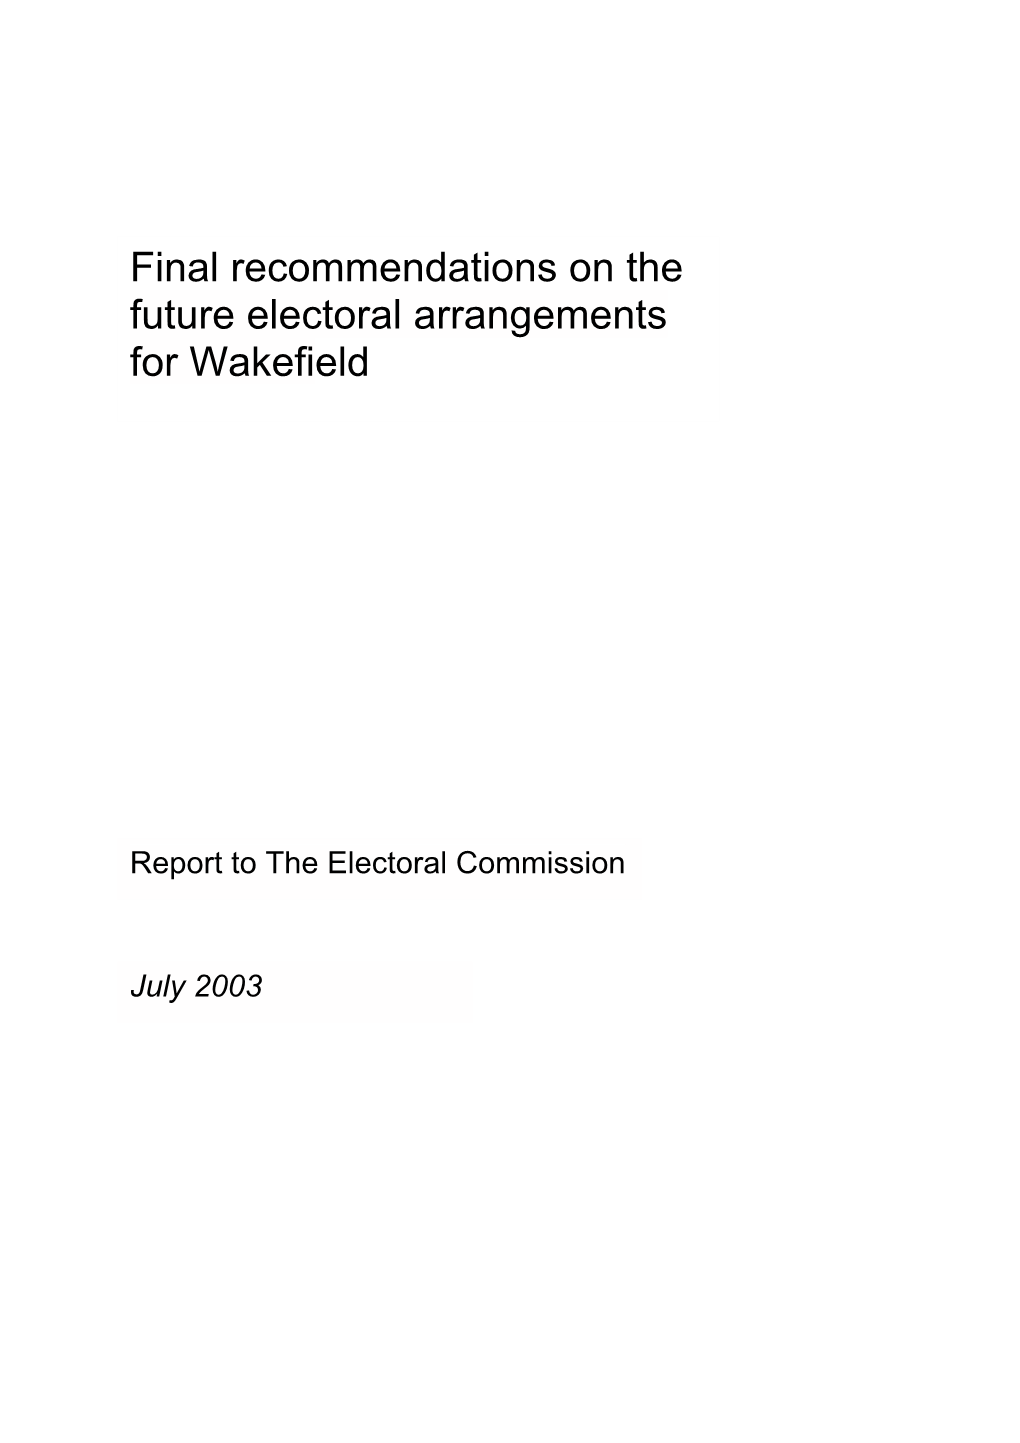 Final Recommendations on the Future Electoral Arrangements for Wakefield